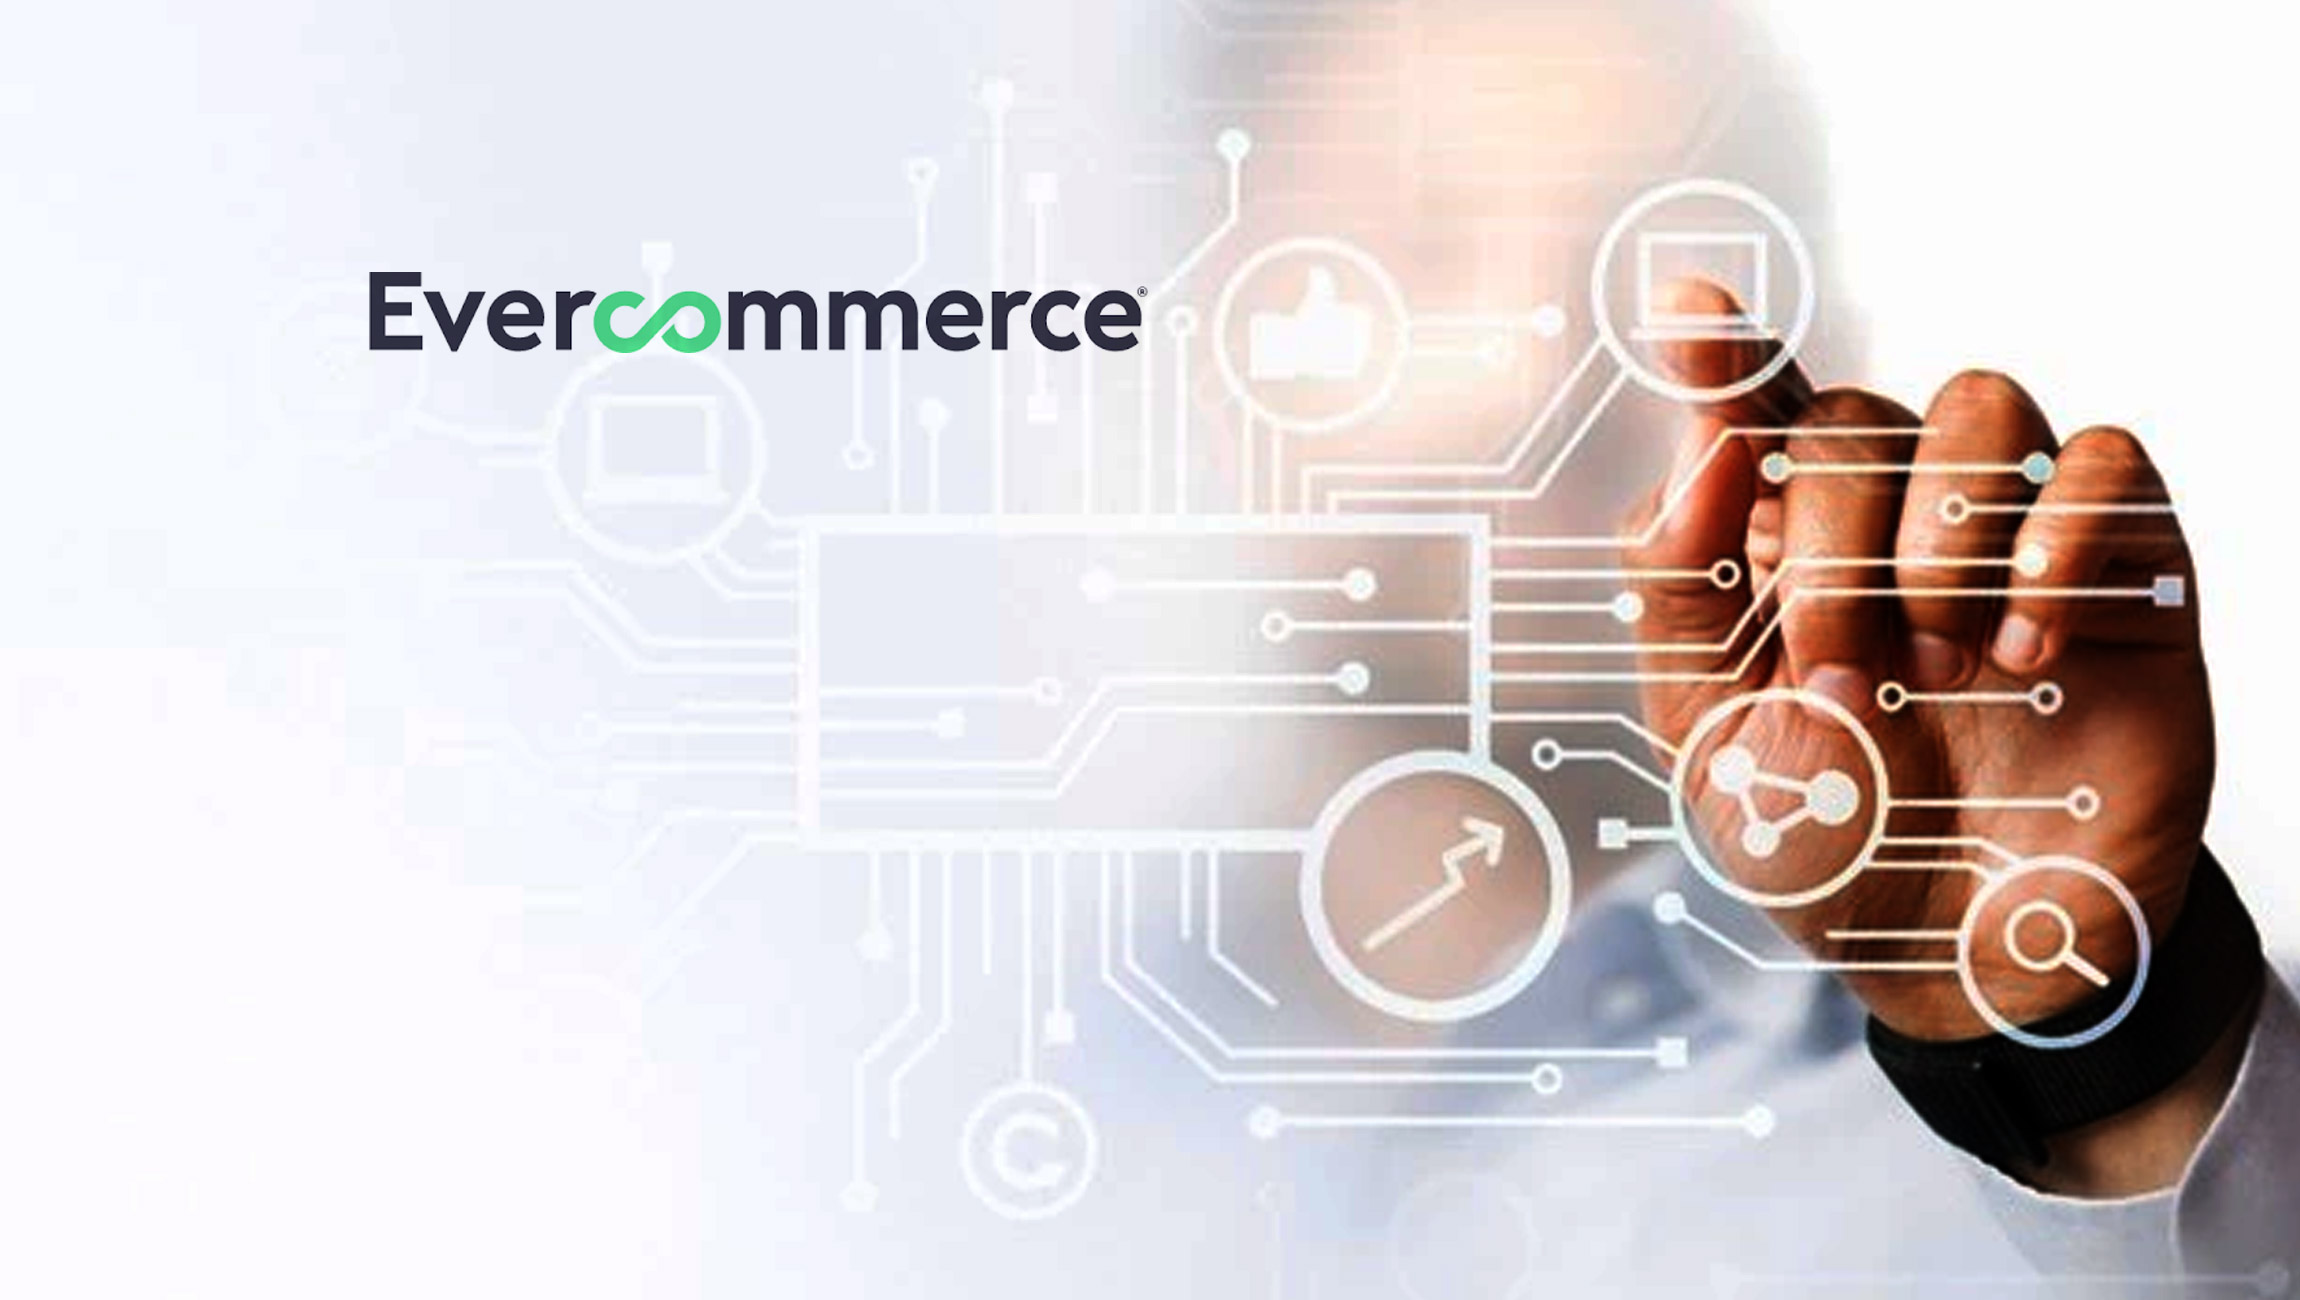 EverCommerce-Accelerated-the-Digital-Transformation-of-the-Service-Economy-in-2021